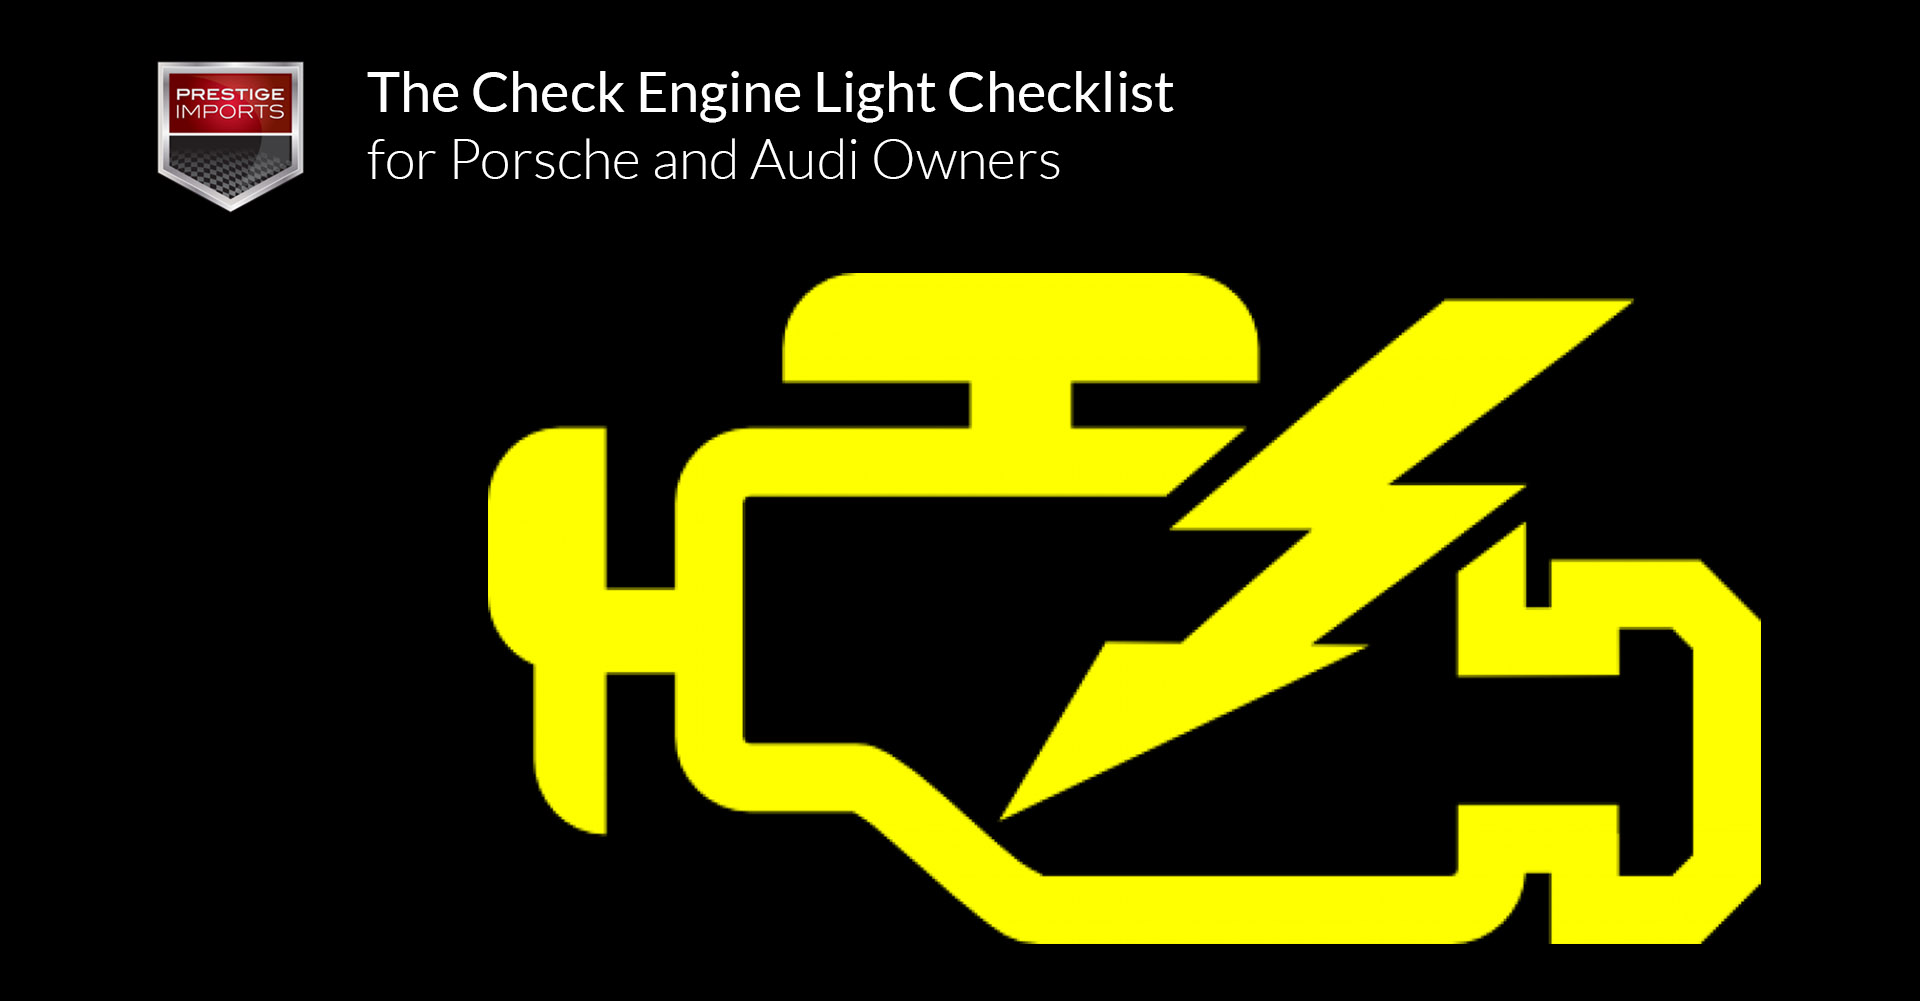 The Check Engine Light Checklist for Porsche and Audi Owners.